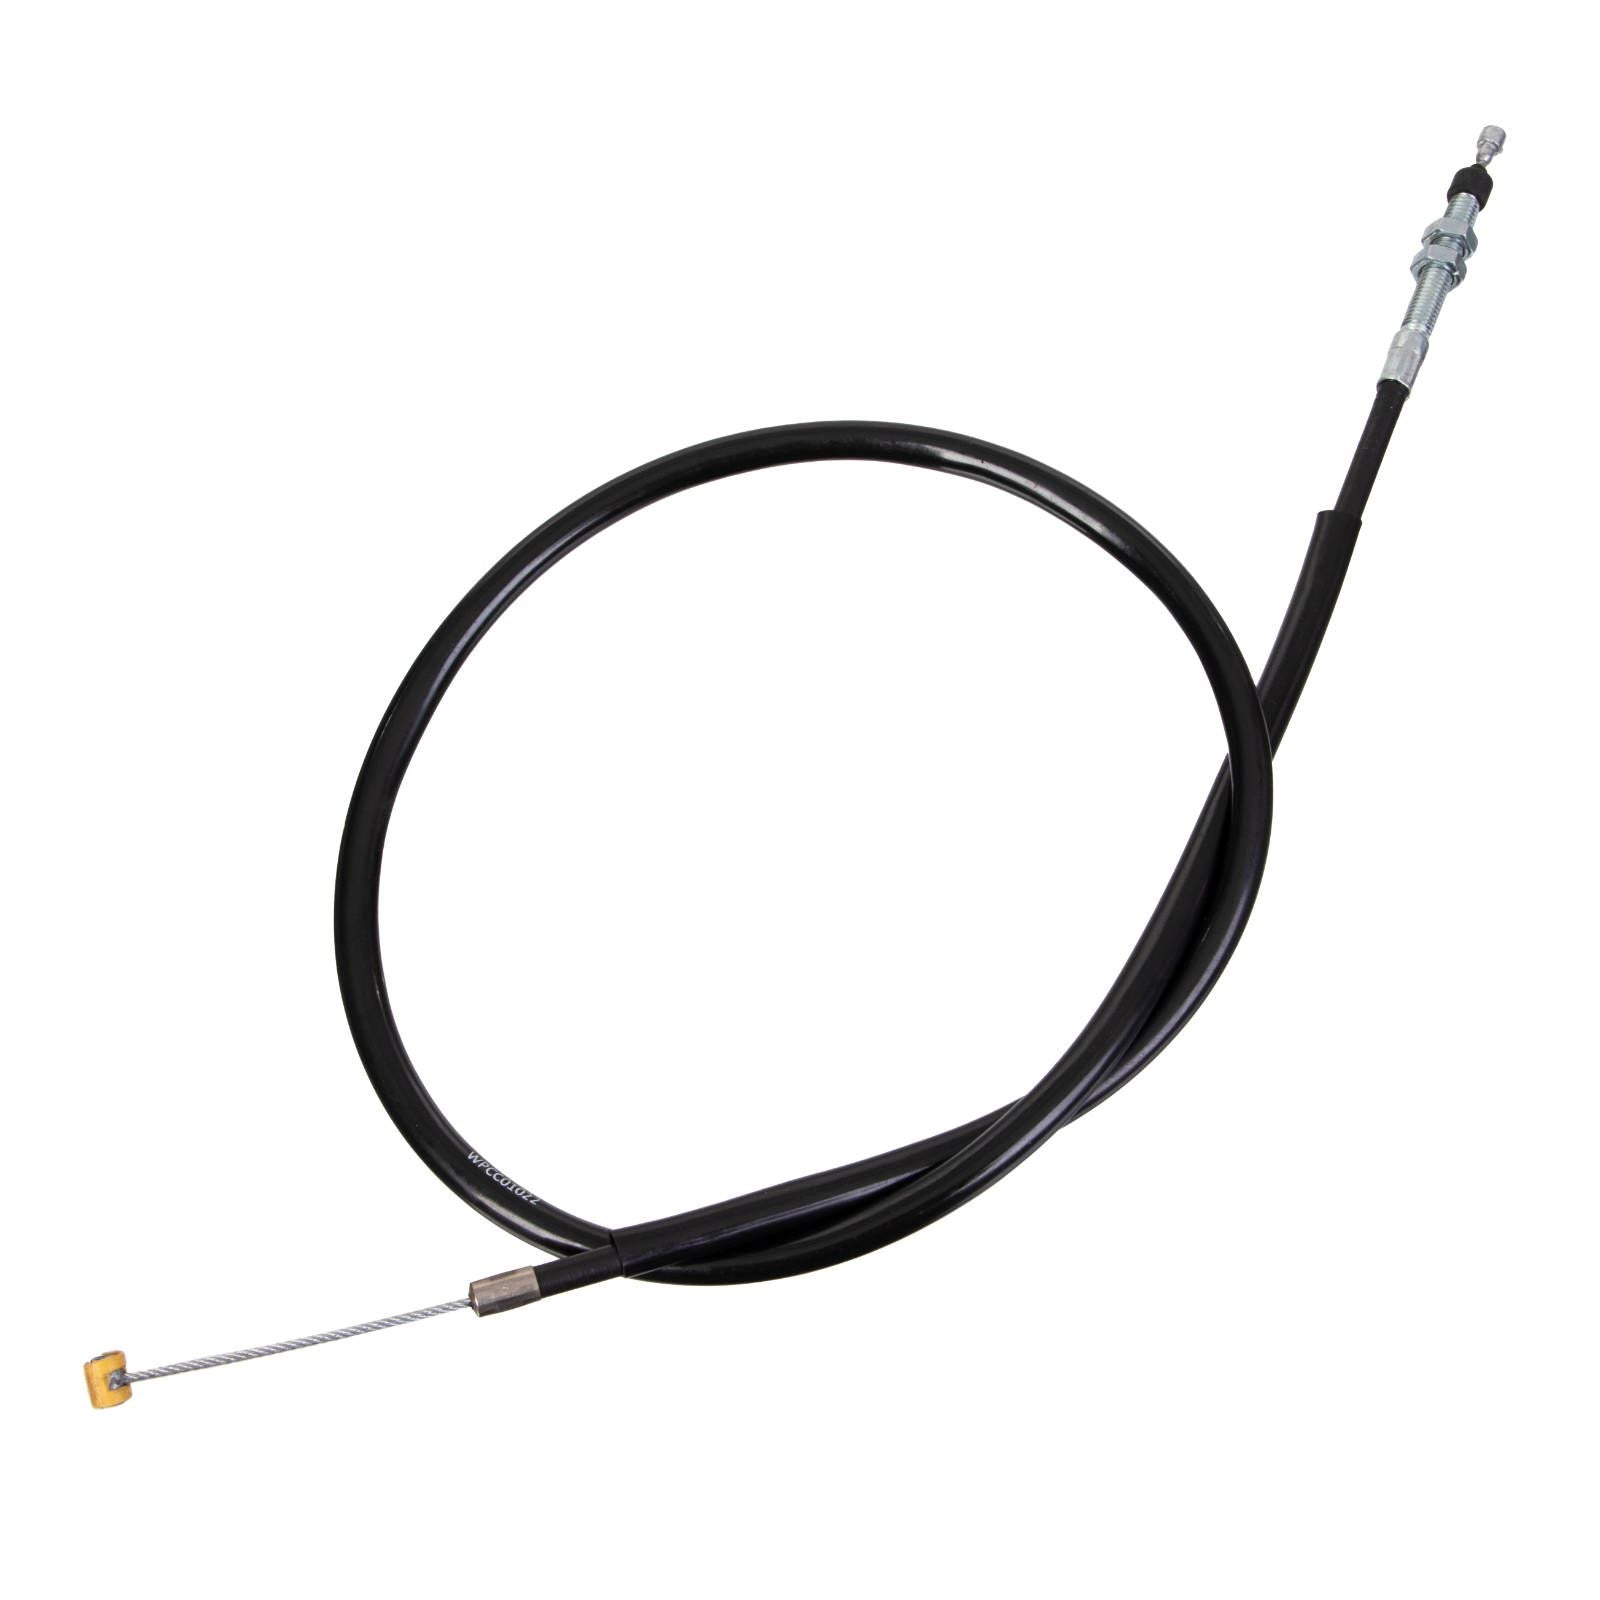 New WHITES Clutch Cable XR190 #WPCC01022